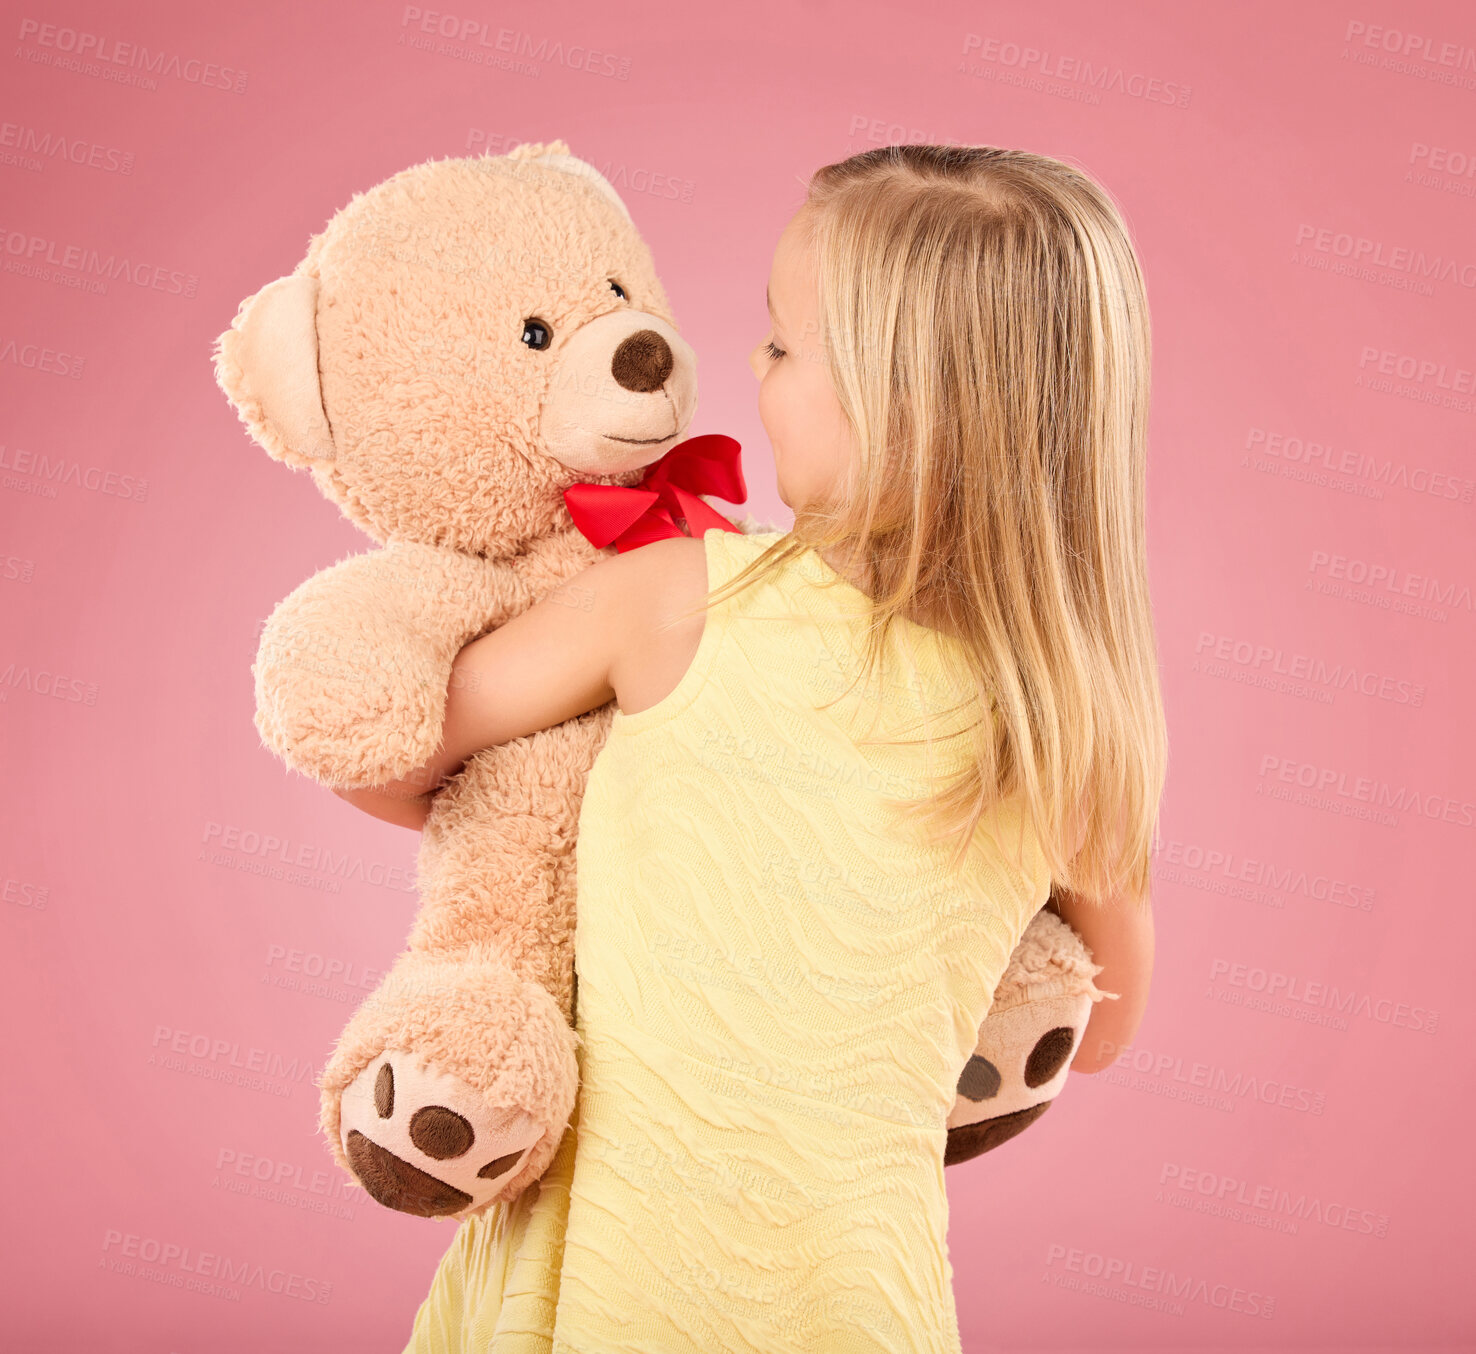 Buy stock photo Teddy bear, happy and back of a child in studio with a big, fluffy and cute toy as gift or present. Adorable, innocent and young girl kid hugging her teddy with care and happiness by pink background.